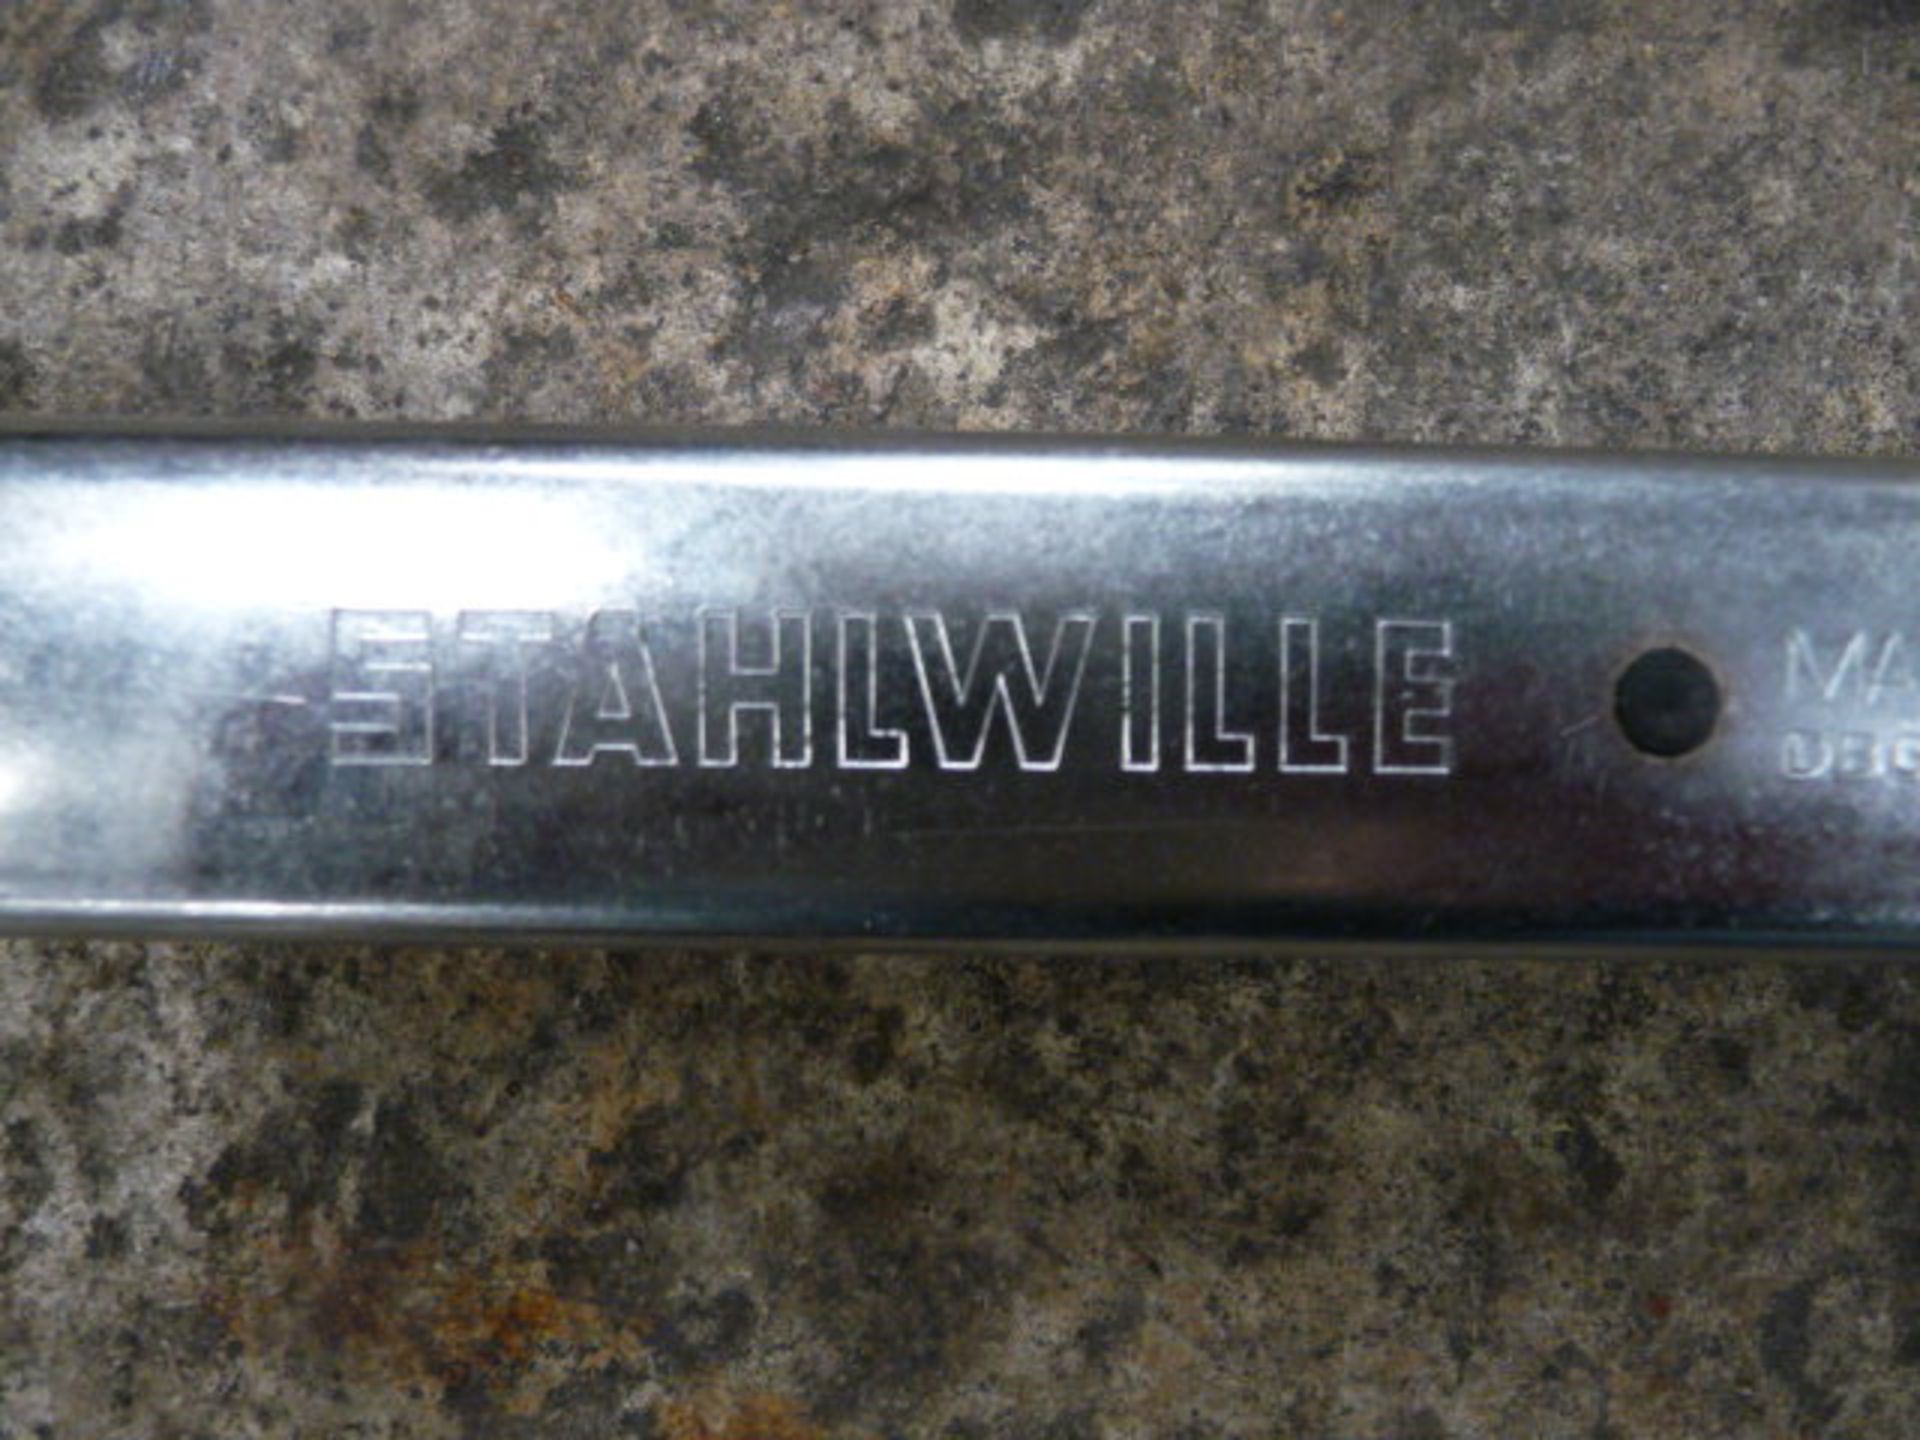 Mercedes-Benz Type Stahlwille Torque Wrench 730R/12 - Image 5 of 8